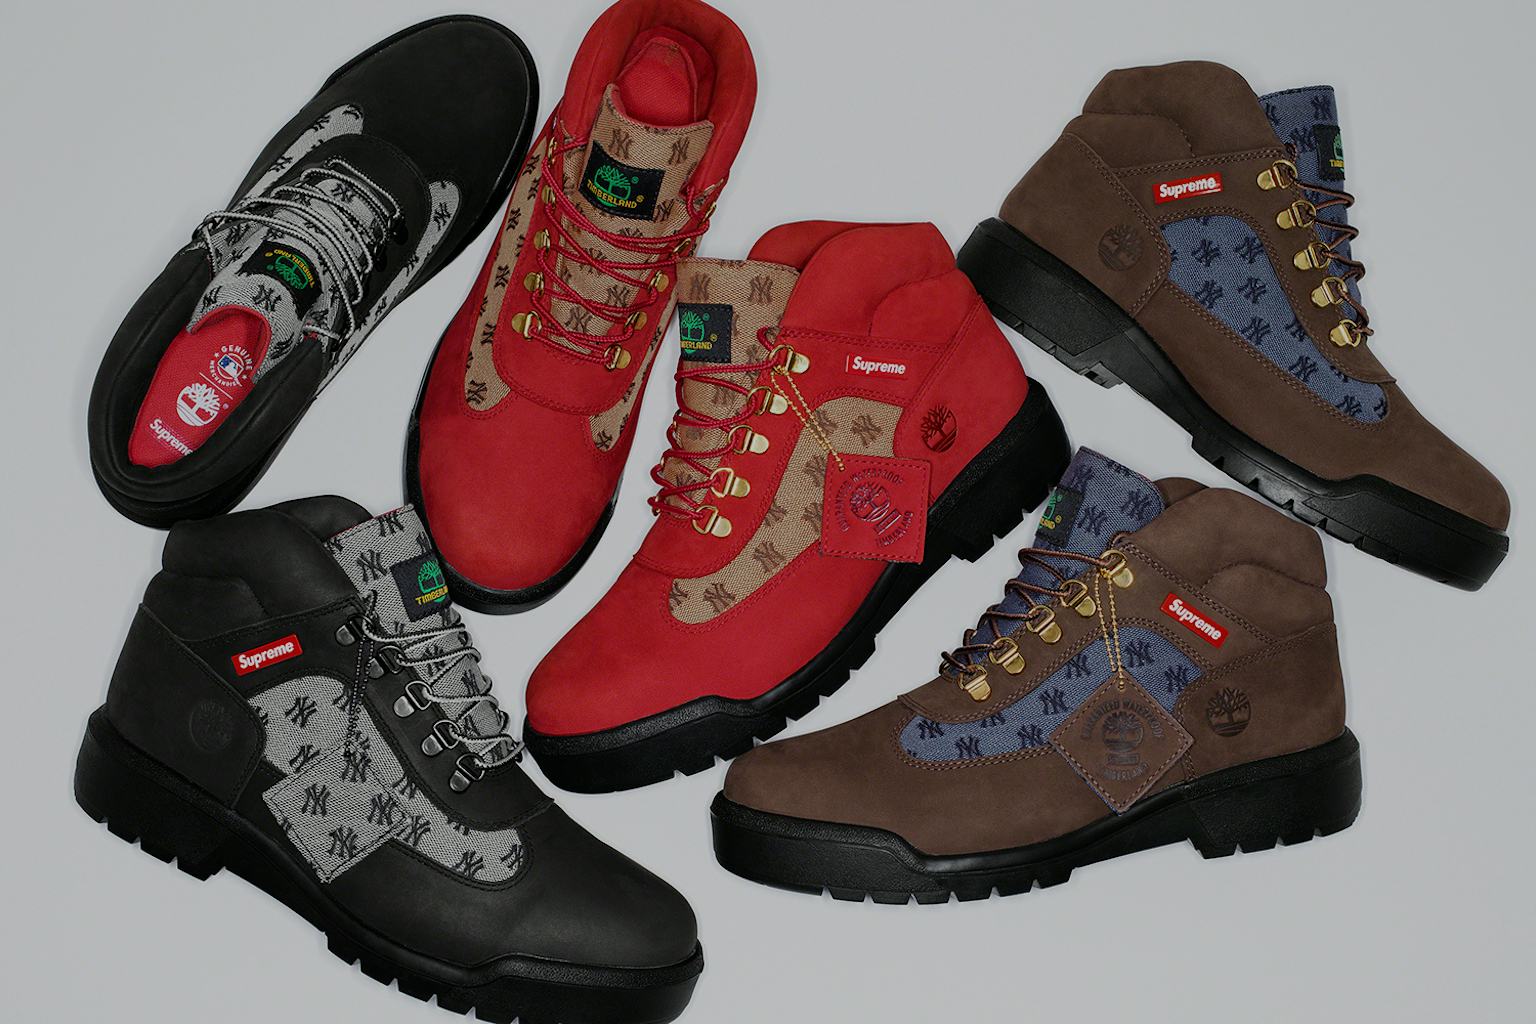 Supreme’s Yankees Timberland boots are ready for a very NYC winter